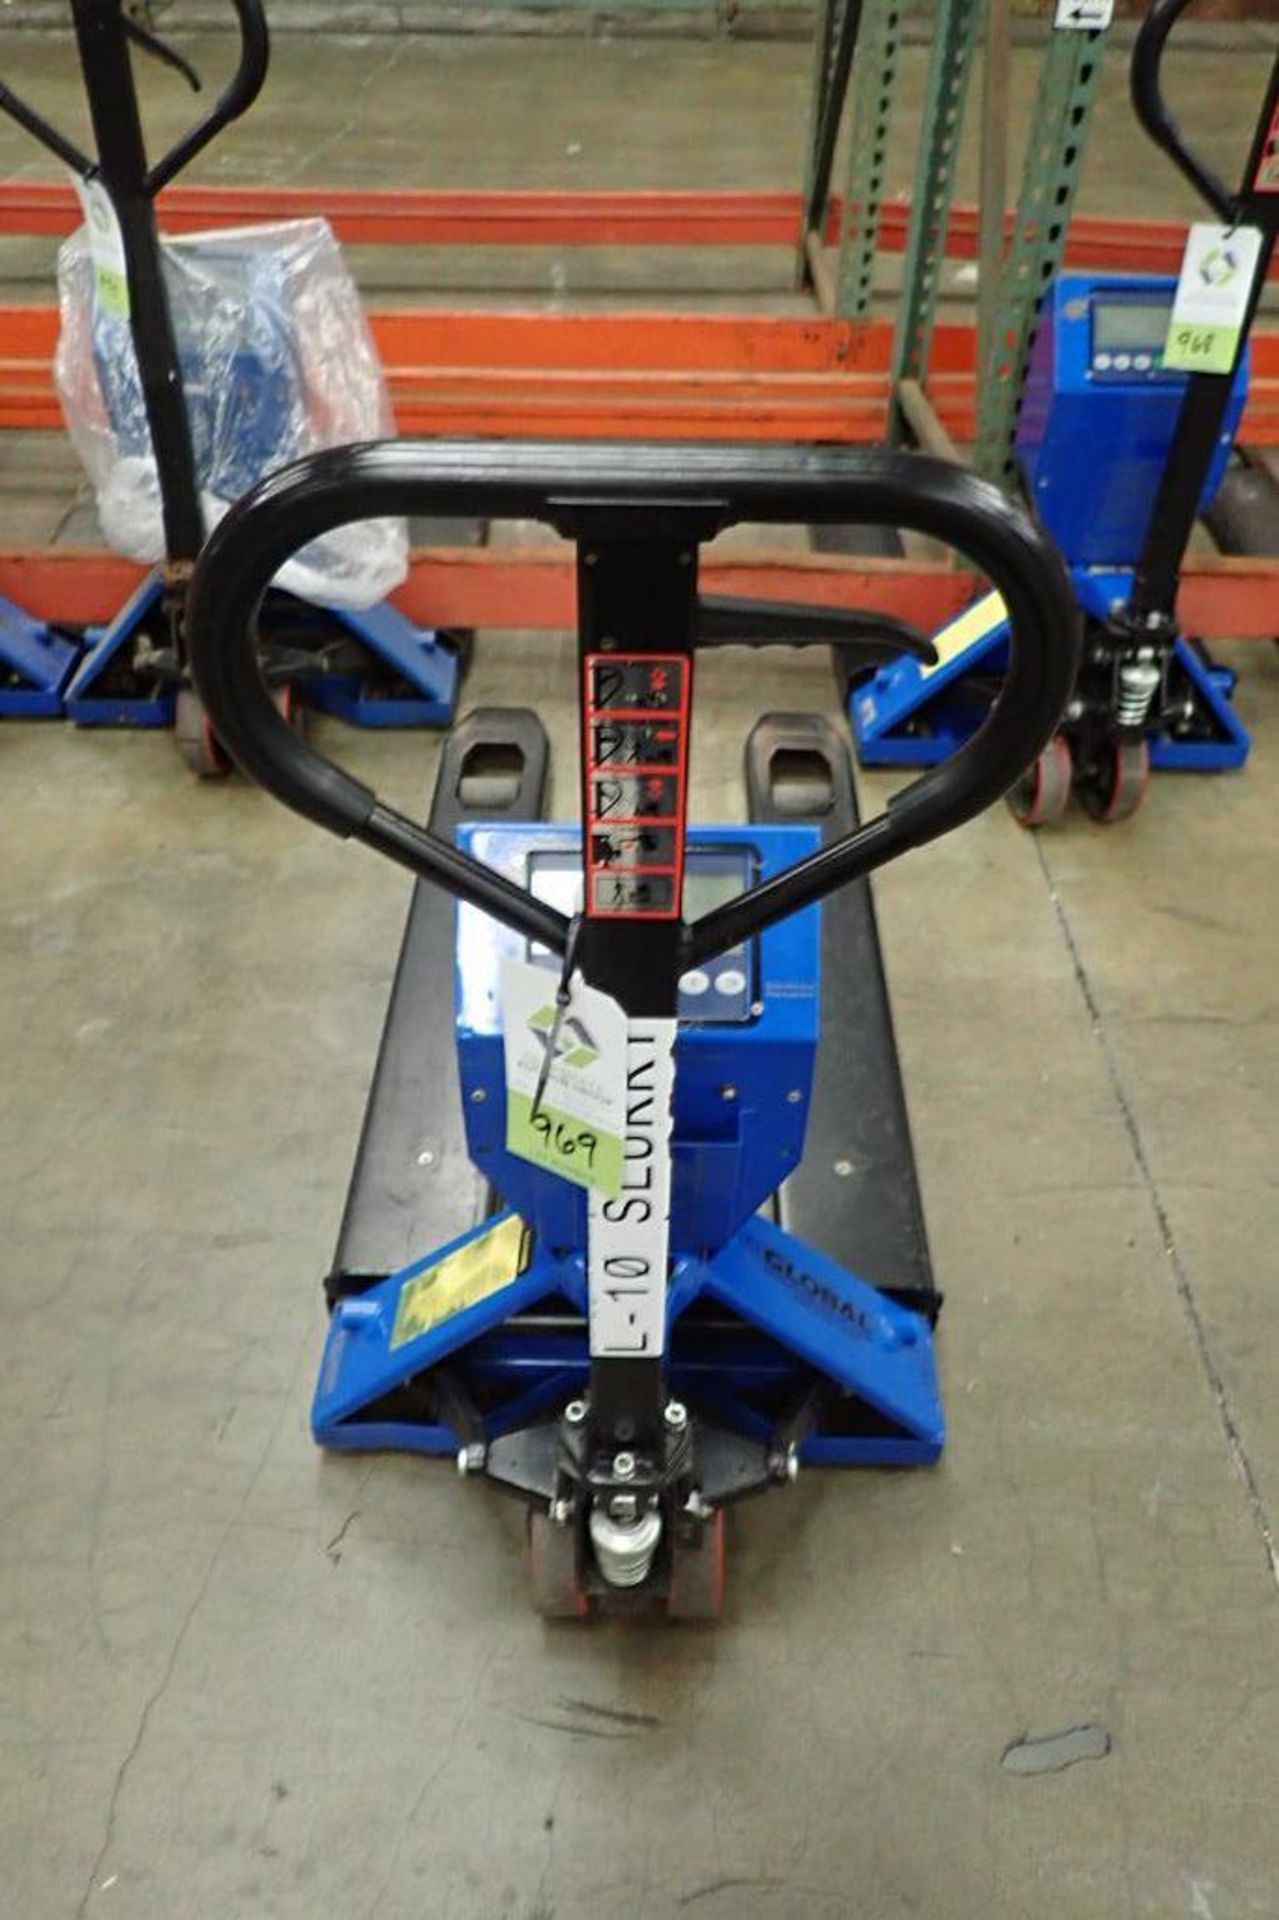 Global Industrial hand pallet jack, SN 382317, with Mettler Toledo on board scale, 5000 lb capacity, - Image 7 of 7